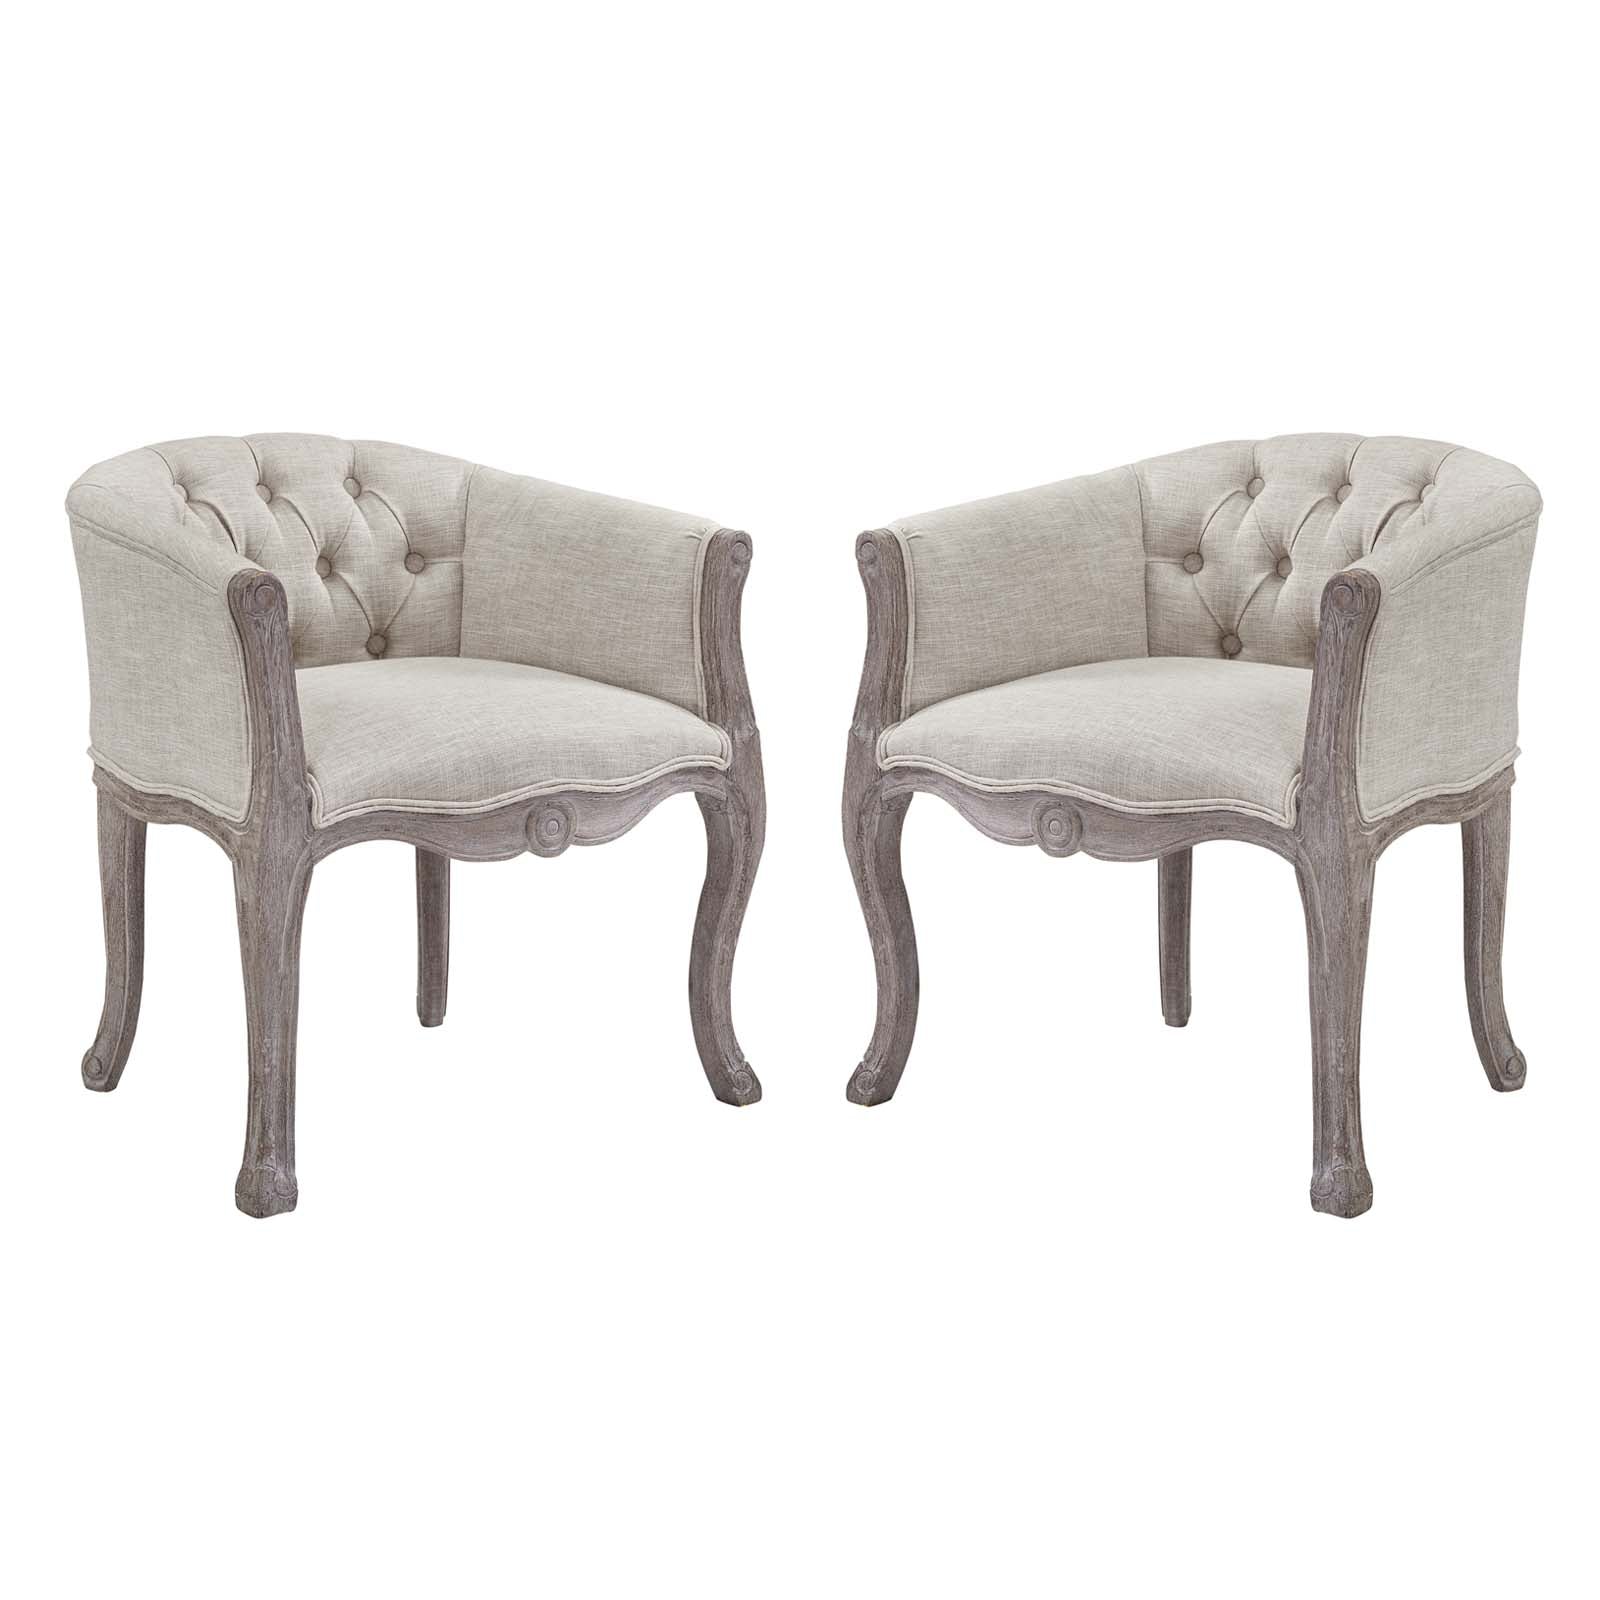 Crown Vintage French Upholstered Fabric Dining Armchair Set of 2 - East Shore Modern Home Furnishings